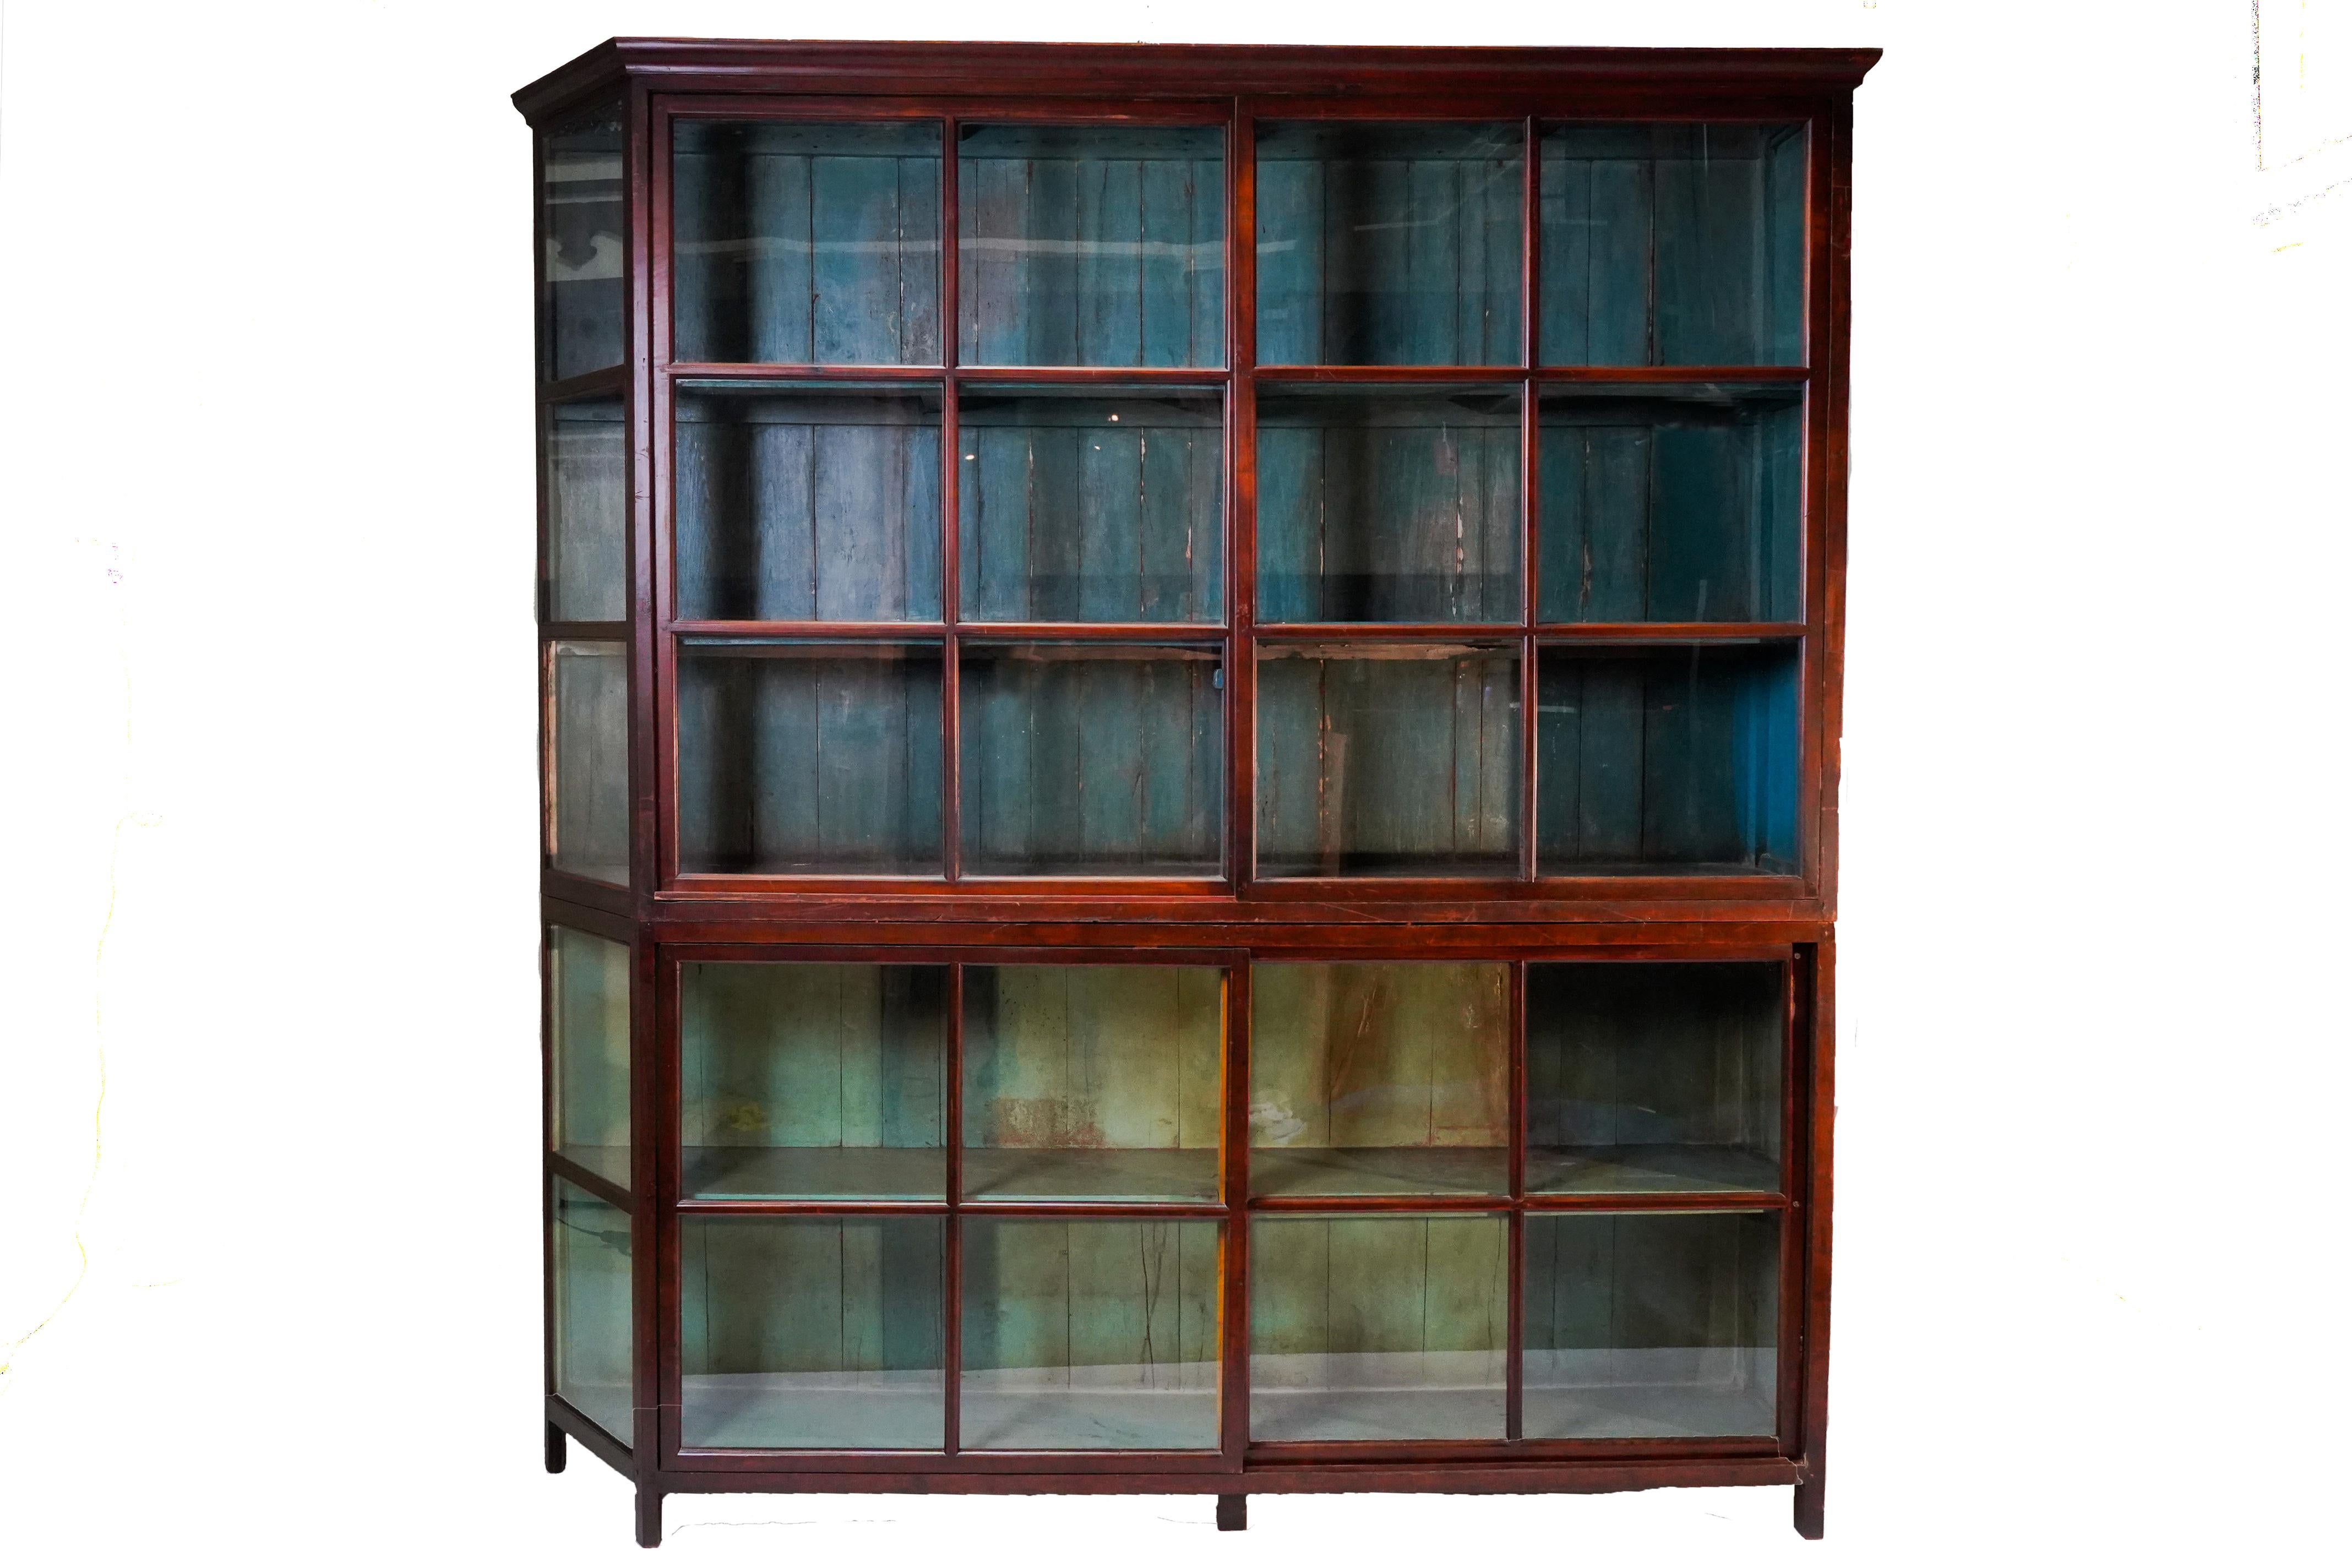 This monumental British book cabinet was made from solid Teak wood and dates to the early 1900's. During the late British Empire in India and Burma much furniture was made in the Anglo-Indian style using native hardwoods and native craftsmen.  